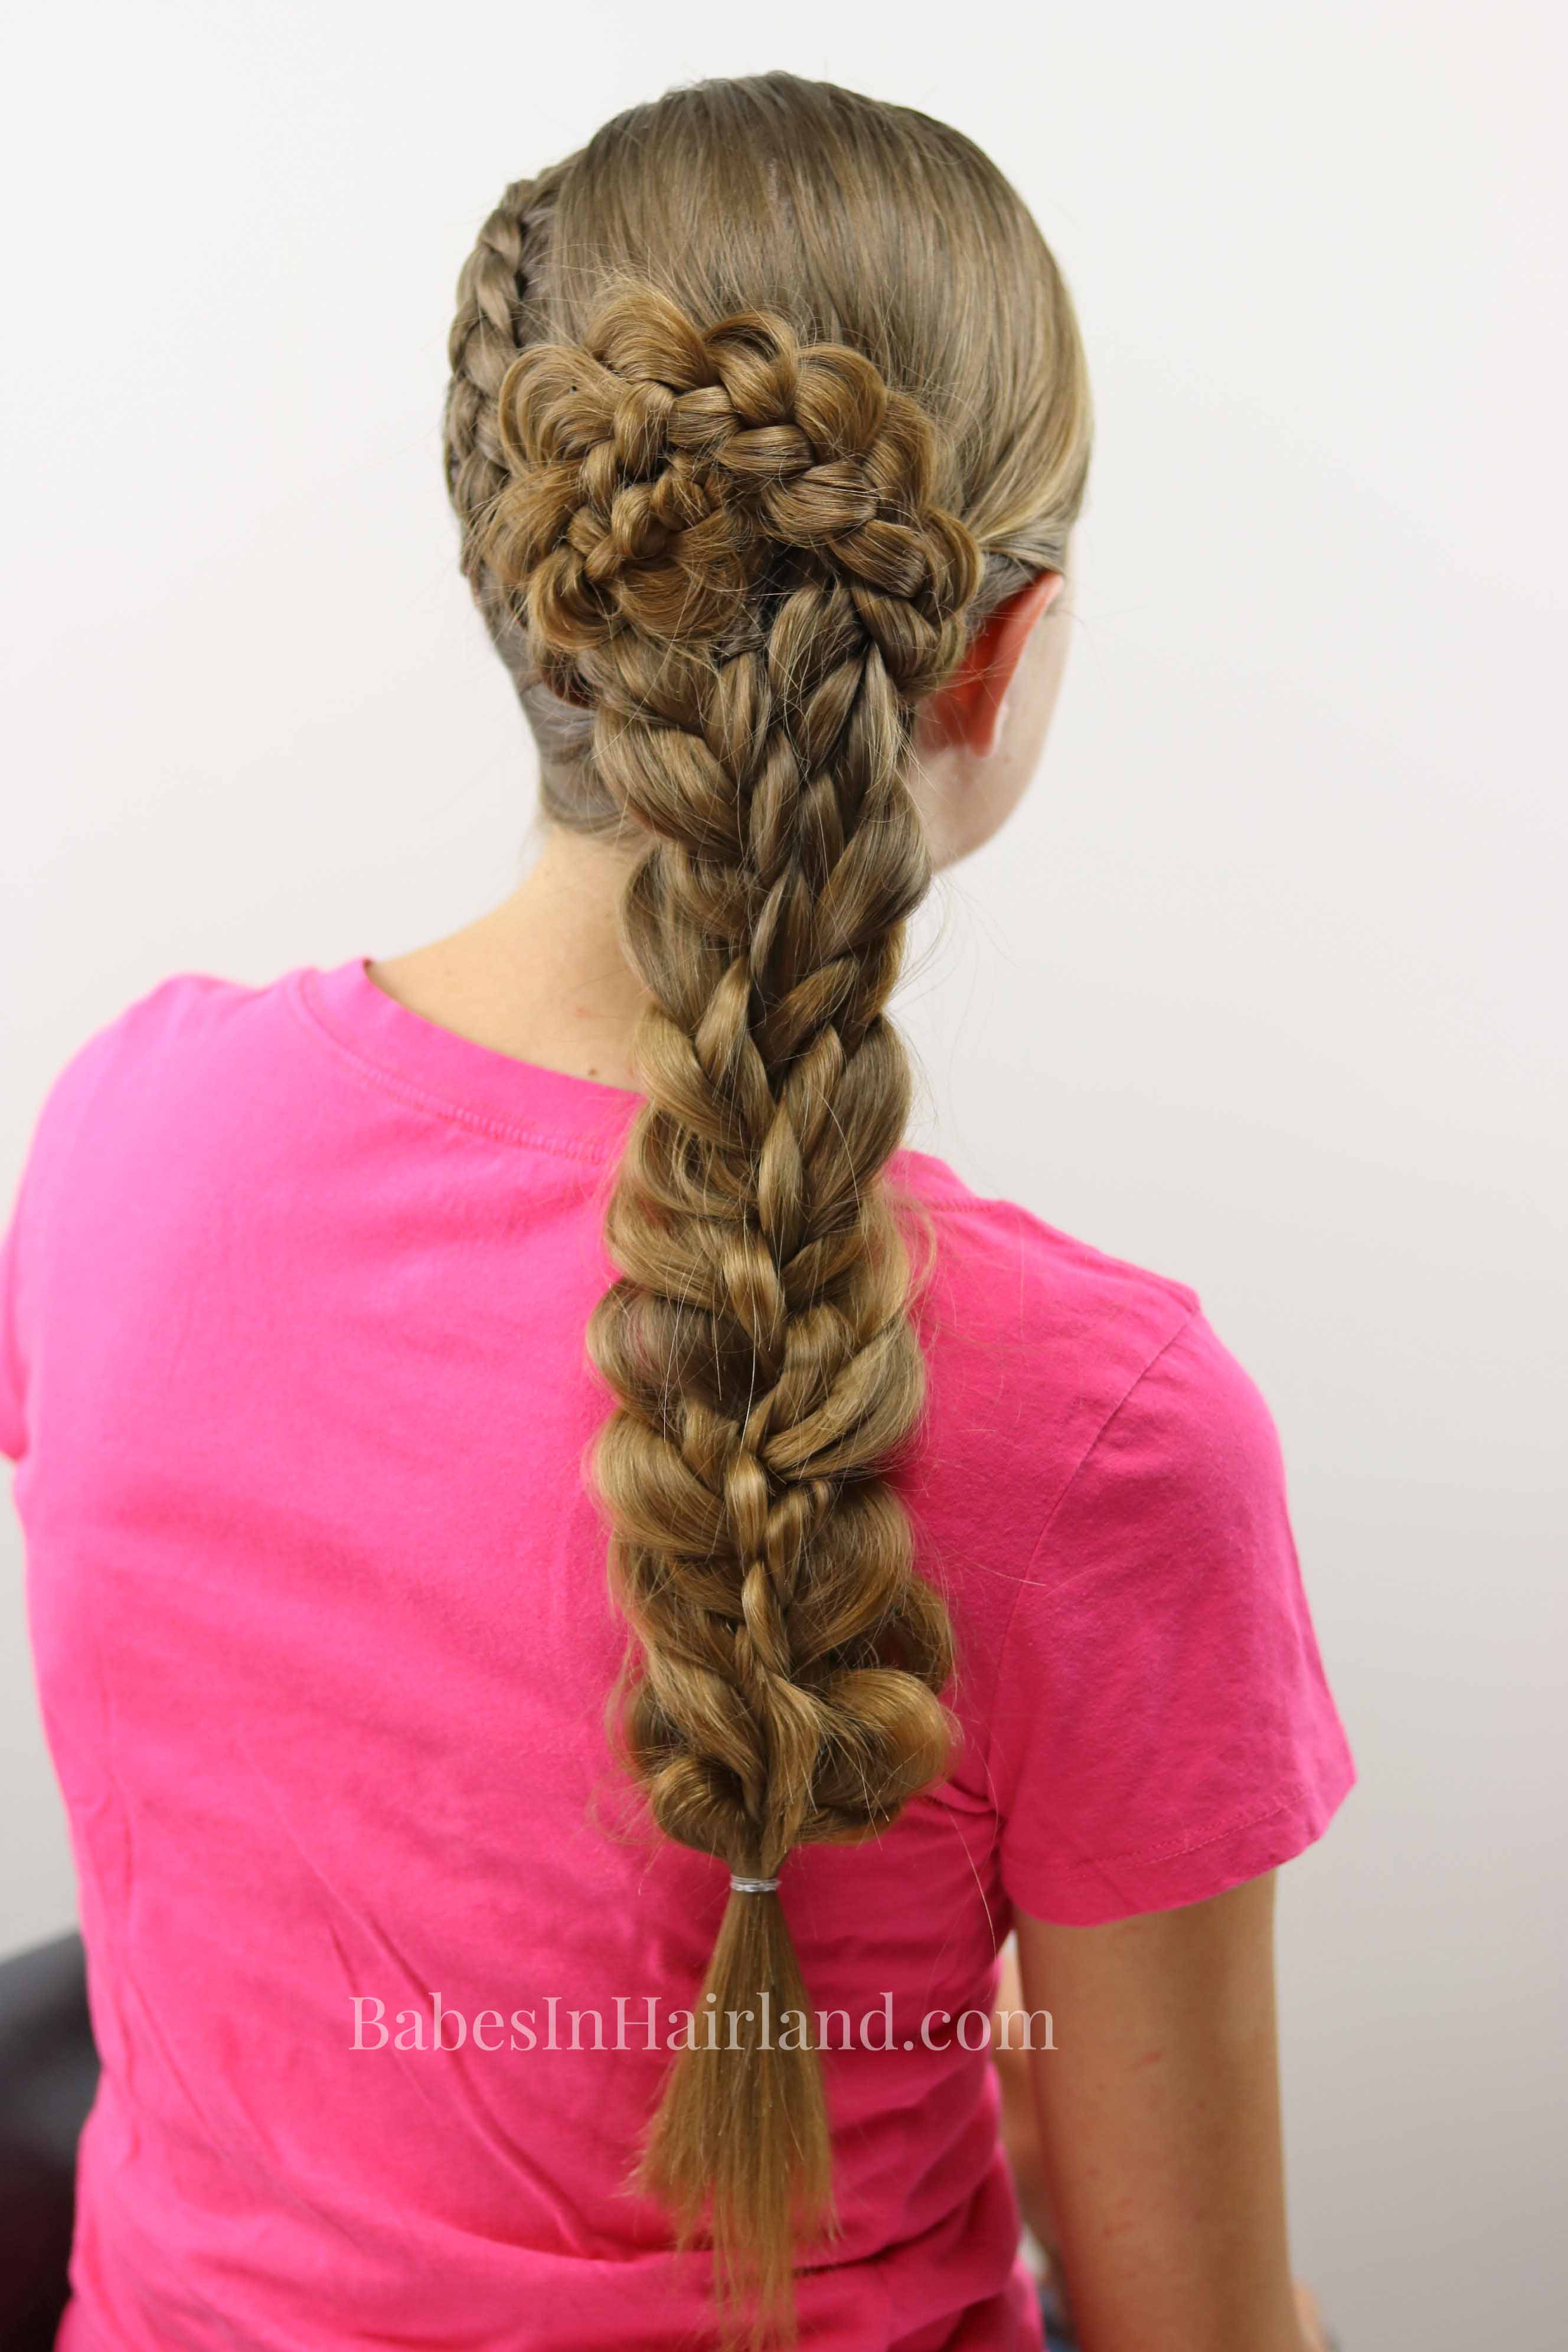 Get An Edgy As Well As Elegant Look With This Side Swept Braids And